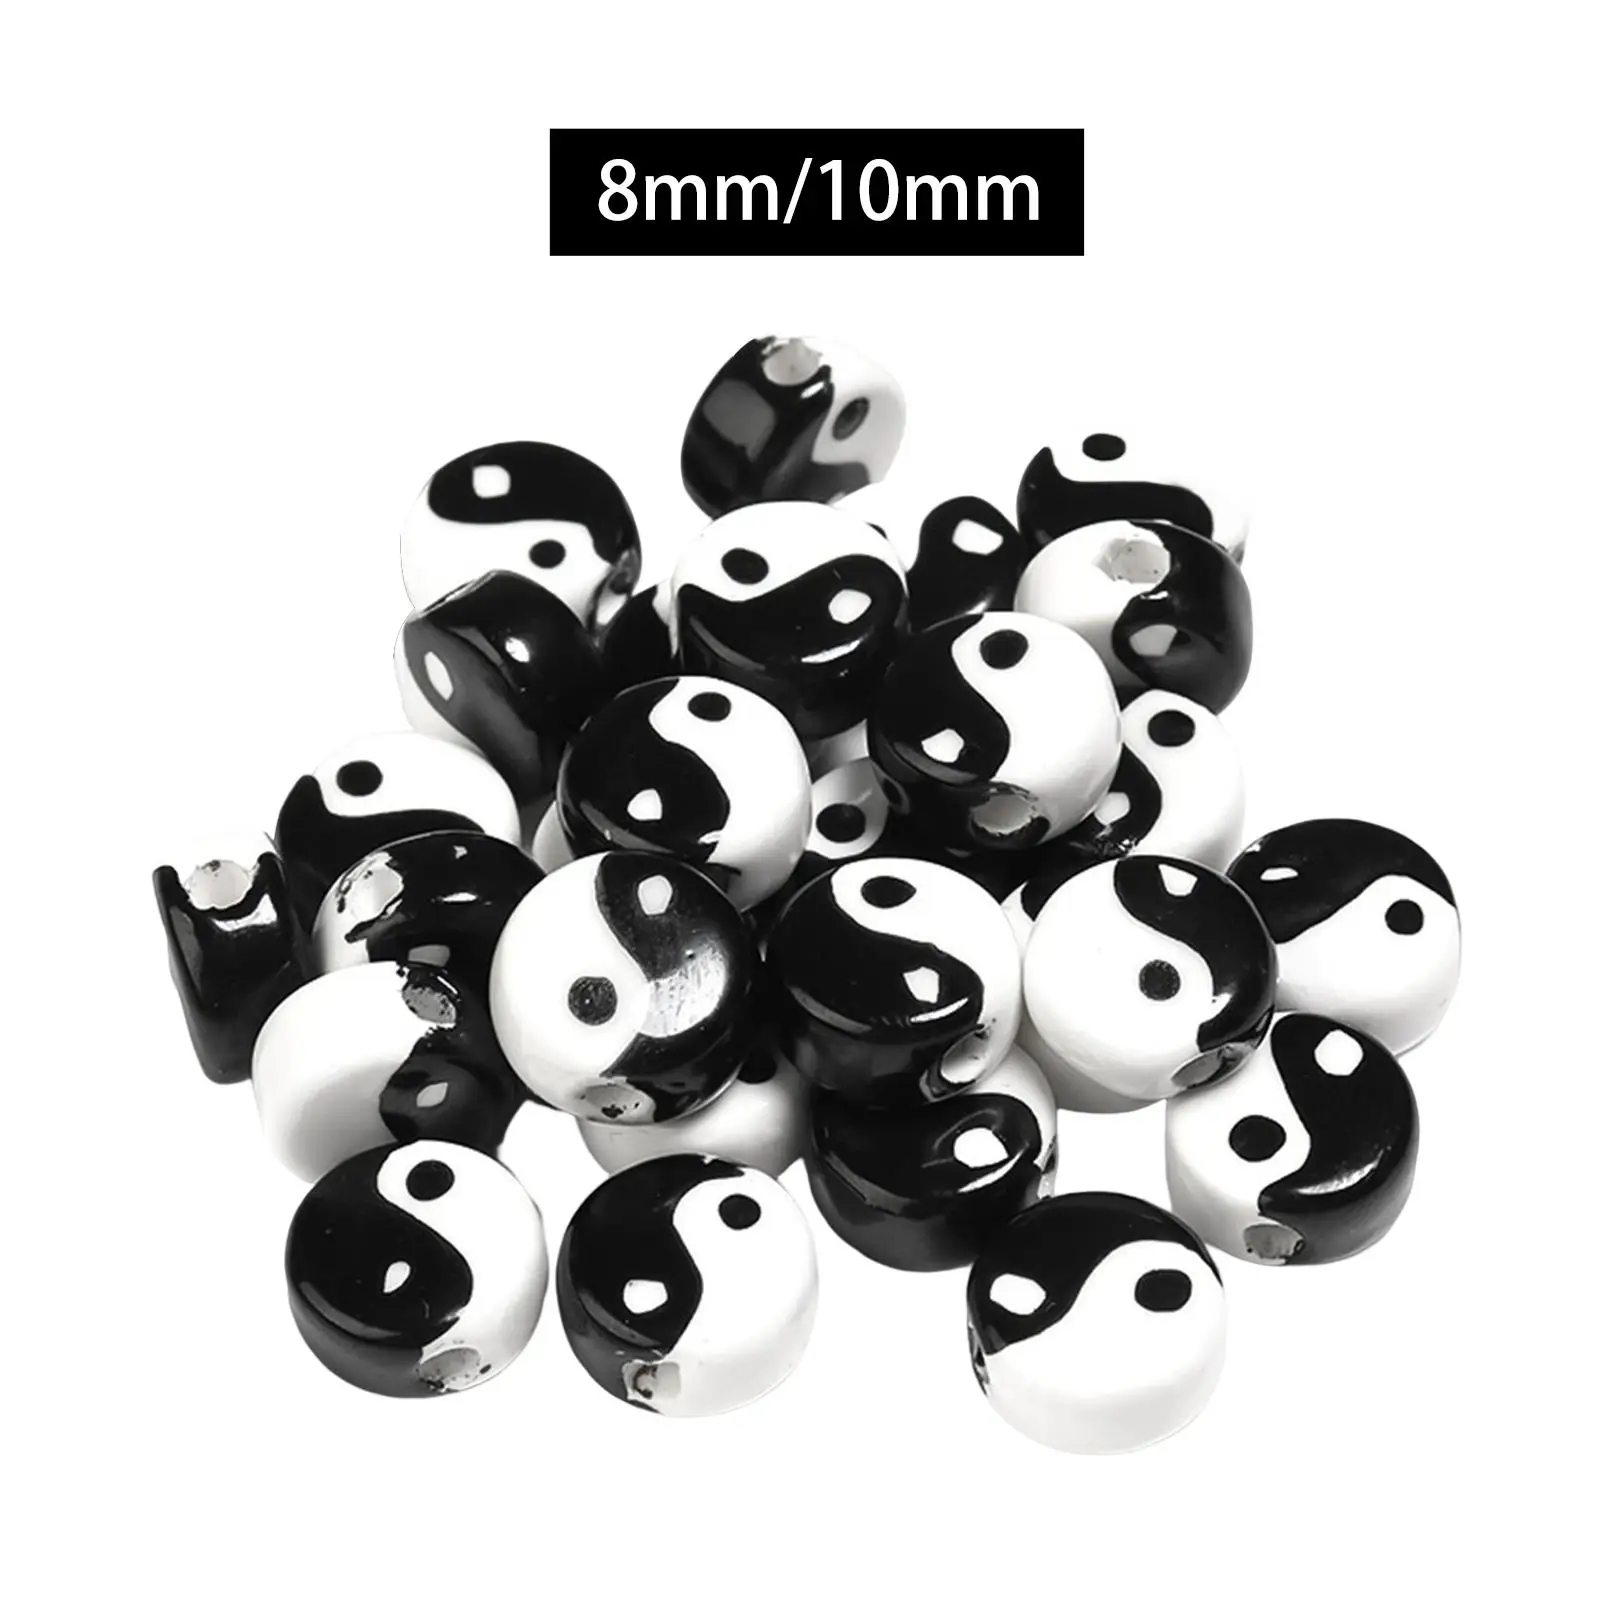 20Pcs Porcelain Spacer Beads Decorative Yin Yang Beads for Findings Necklace